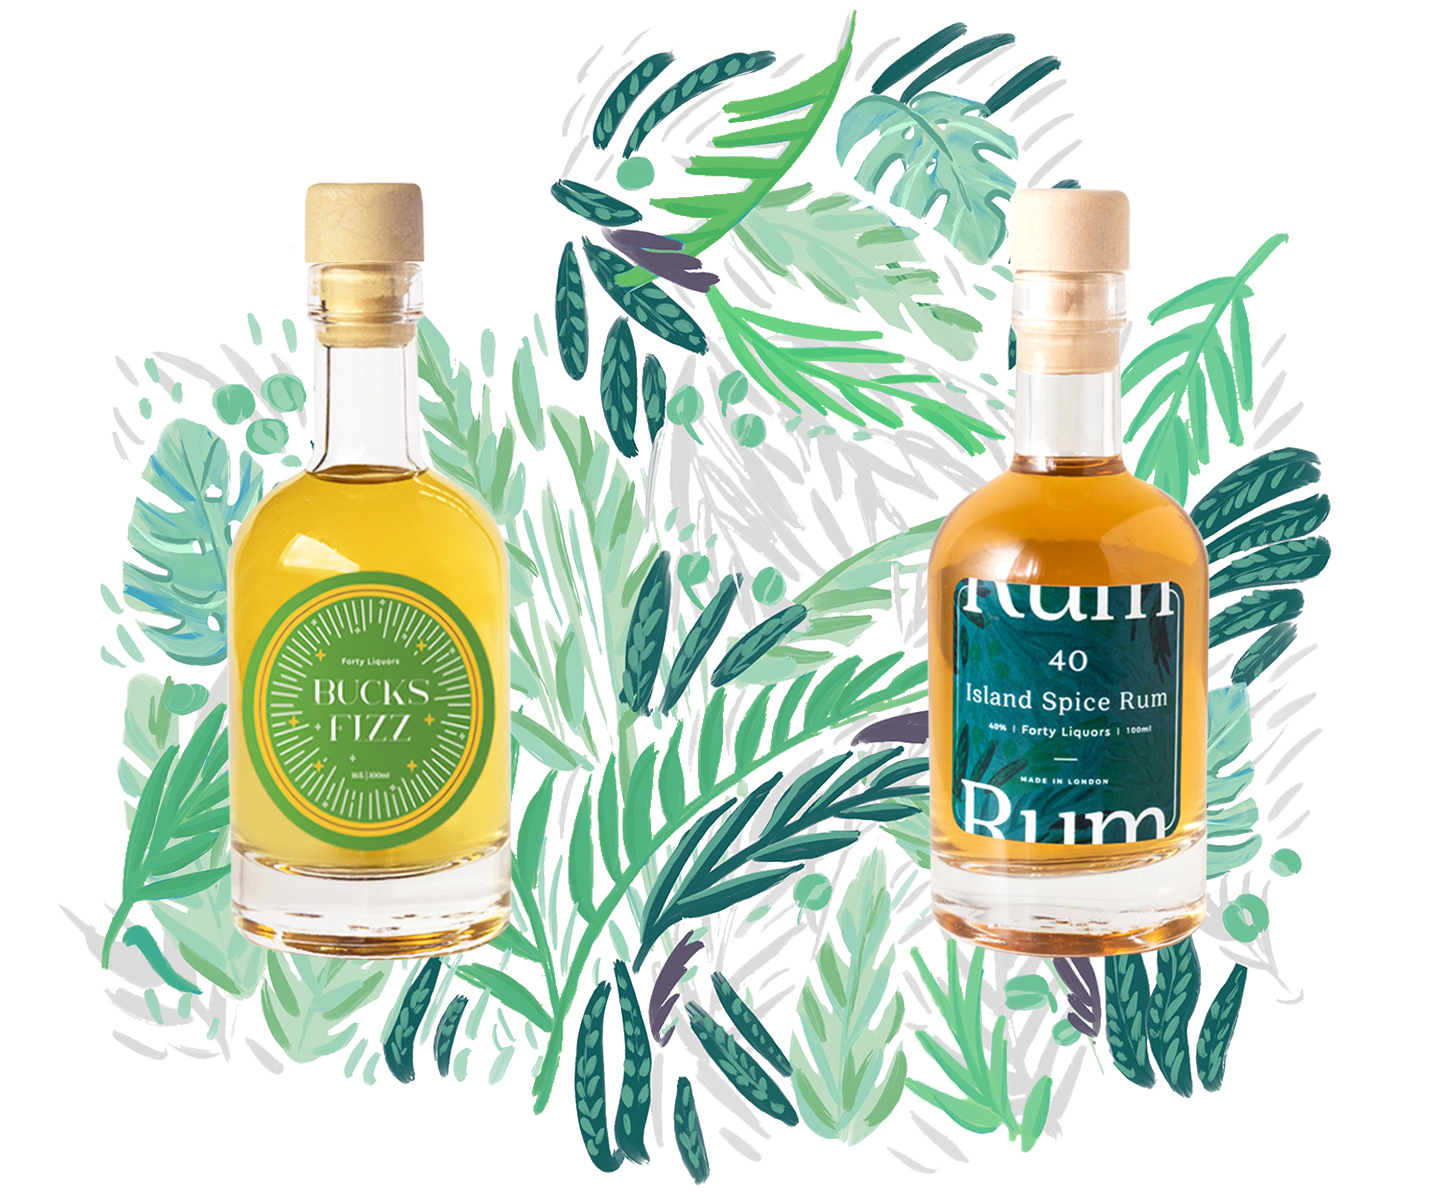 Bucks Fizz and Island Spiced Rum with illustrative leaf decoration in green